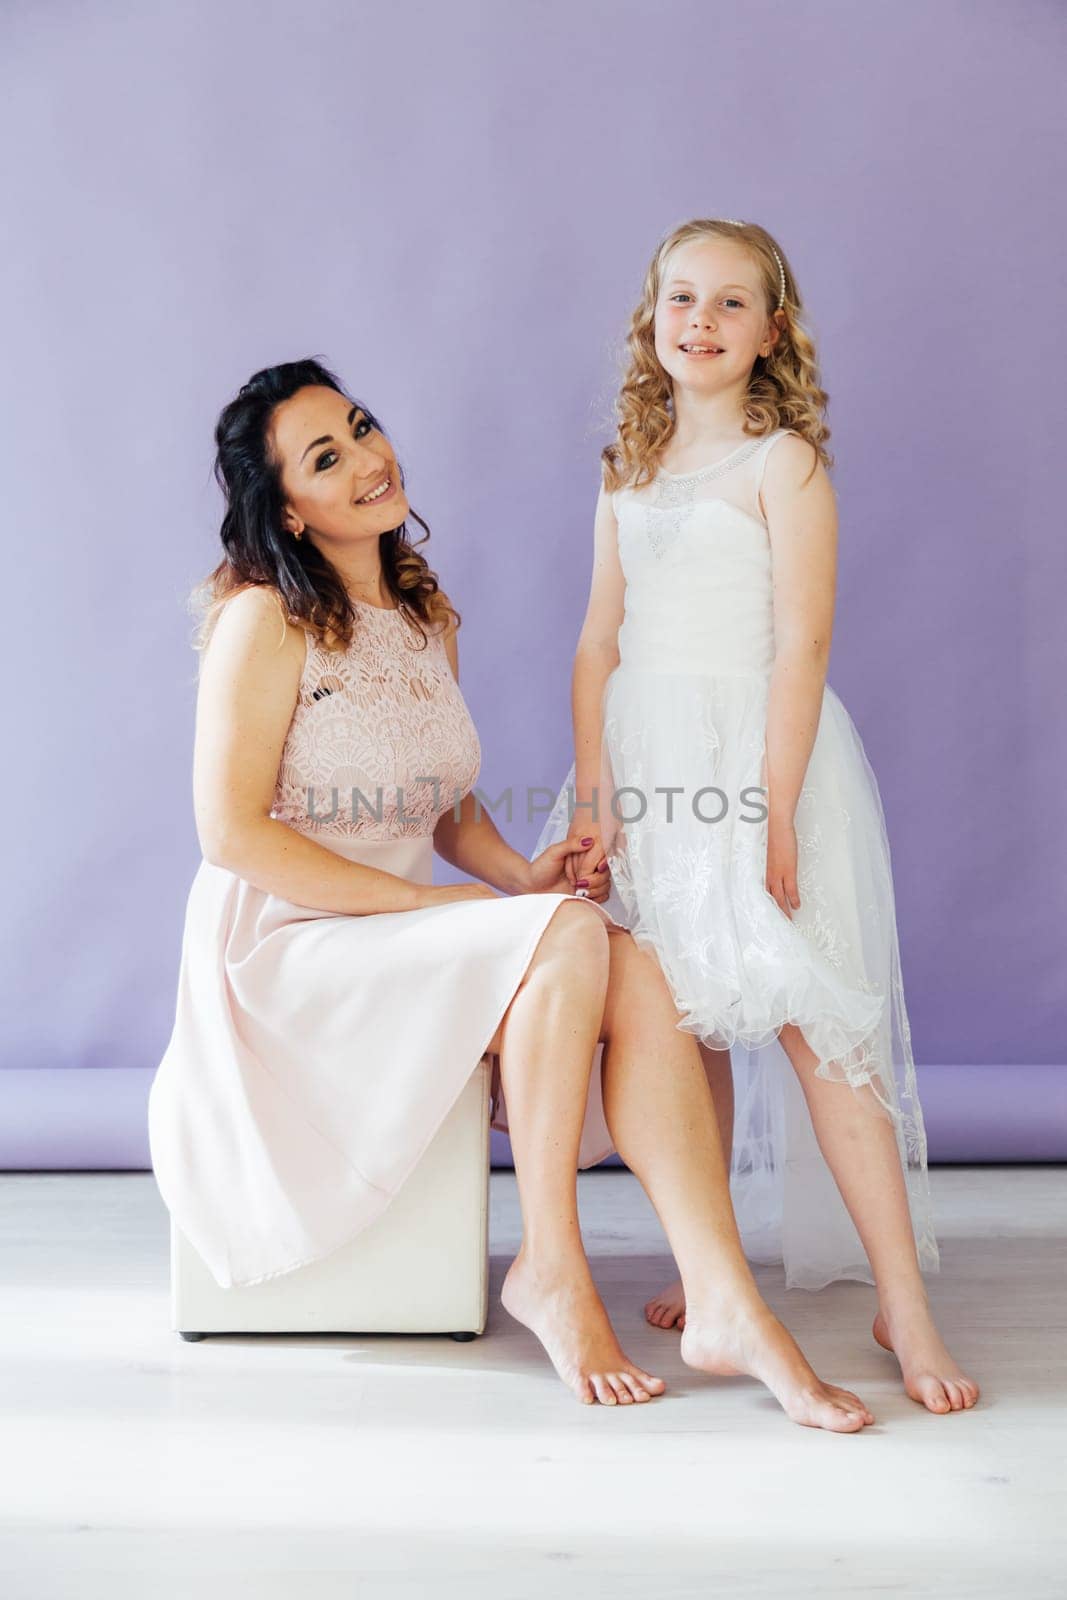 Mom and daughter portrait on a light background by Simakov